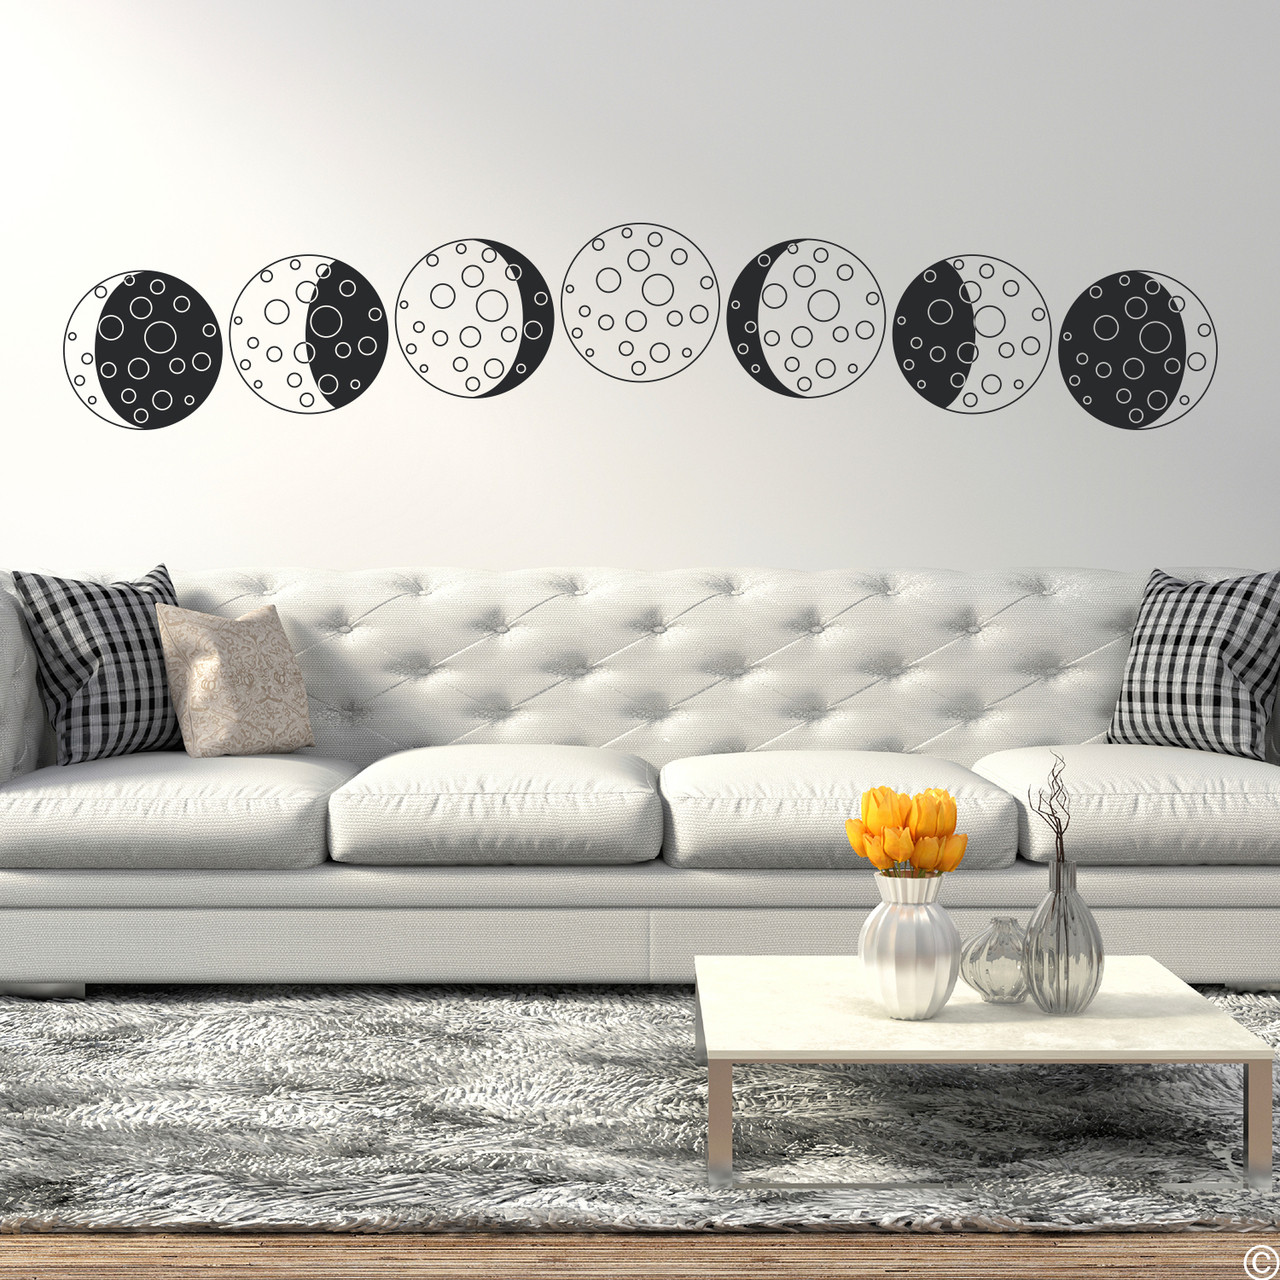 Phases of the Cartoon Moon vinyl wall decal in black